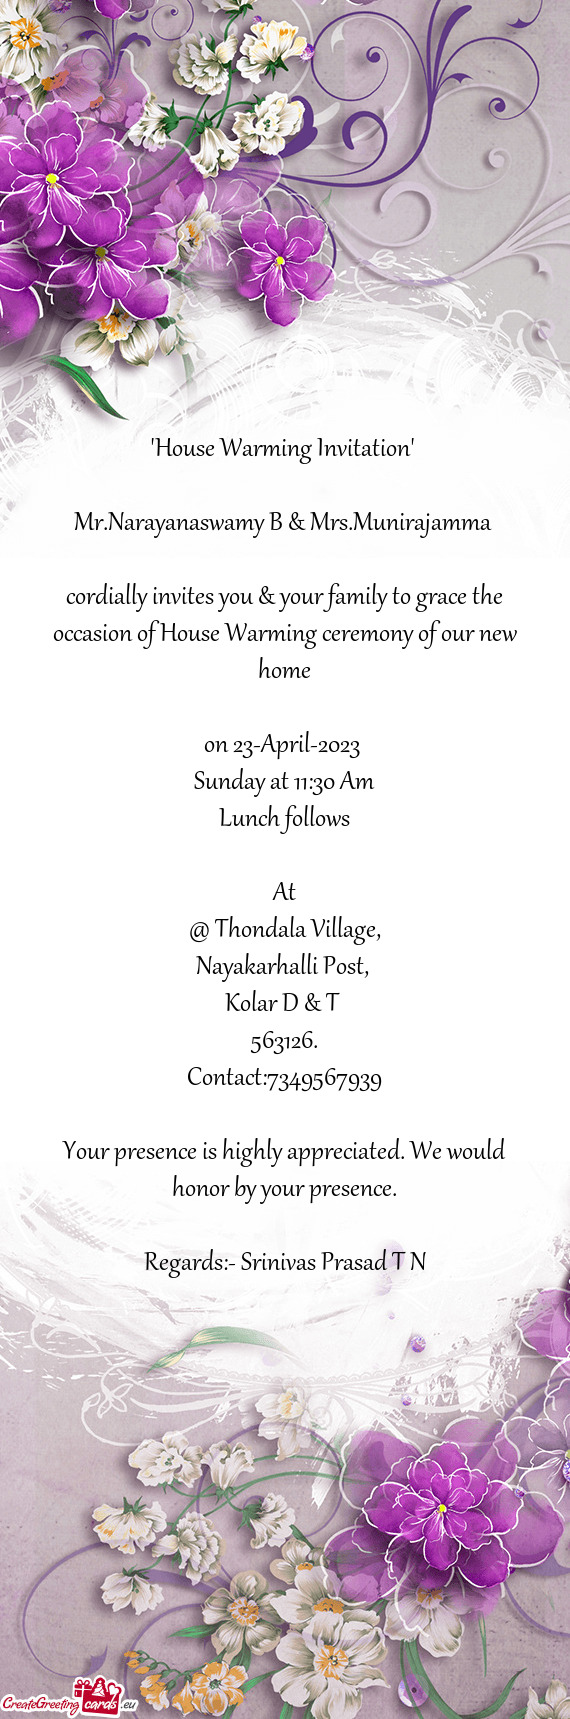 Cordially invites you & your family to grace the occasion of House Warming ceremony of our new home